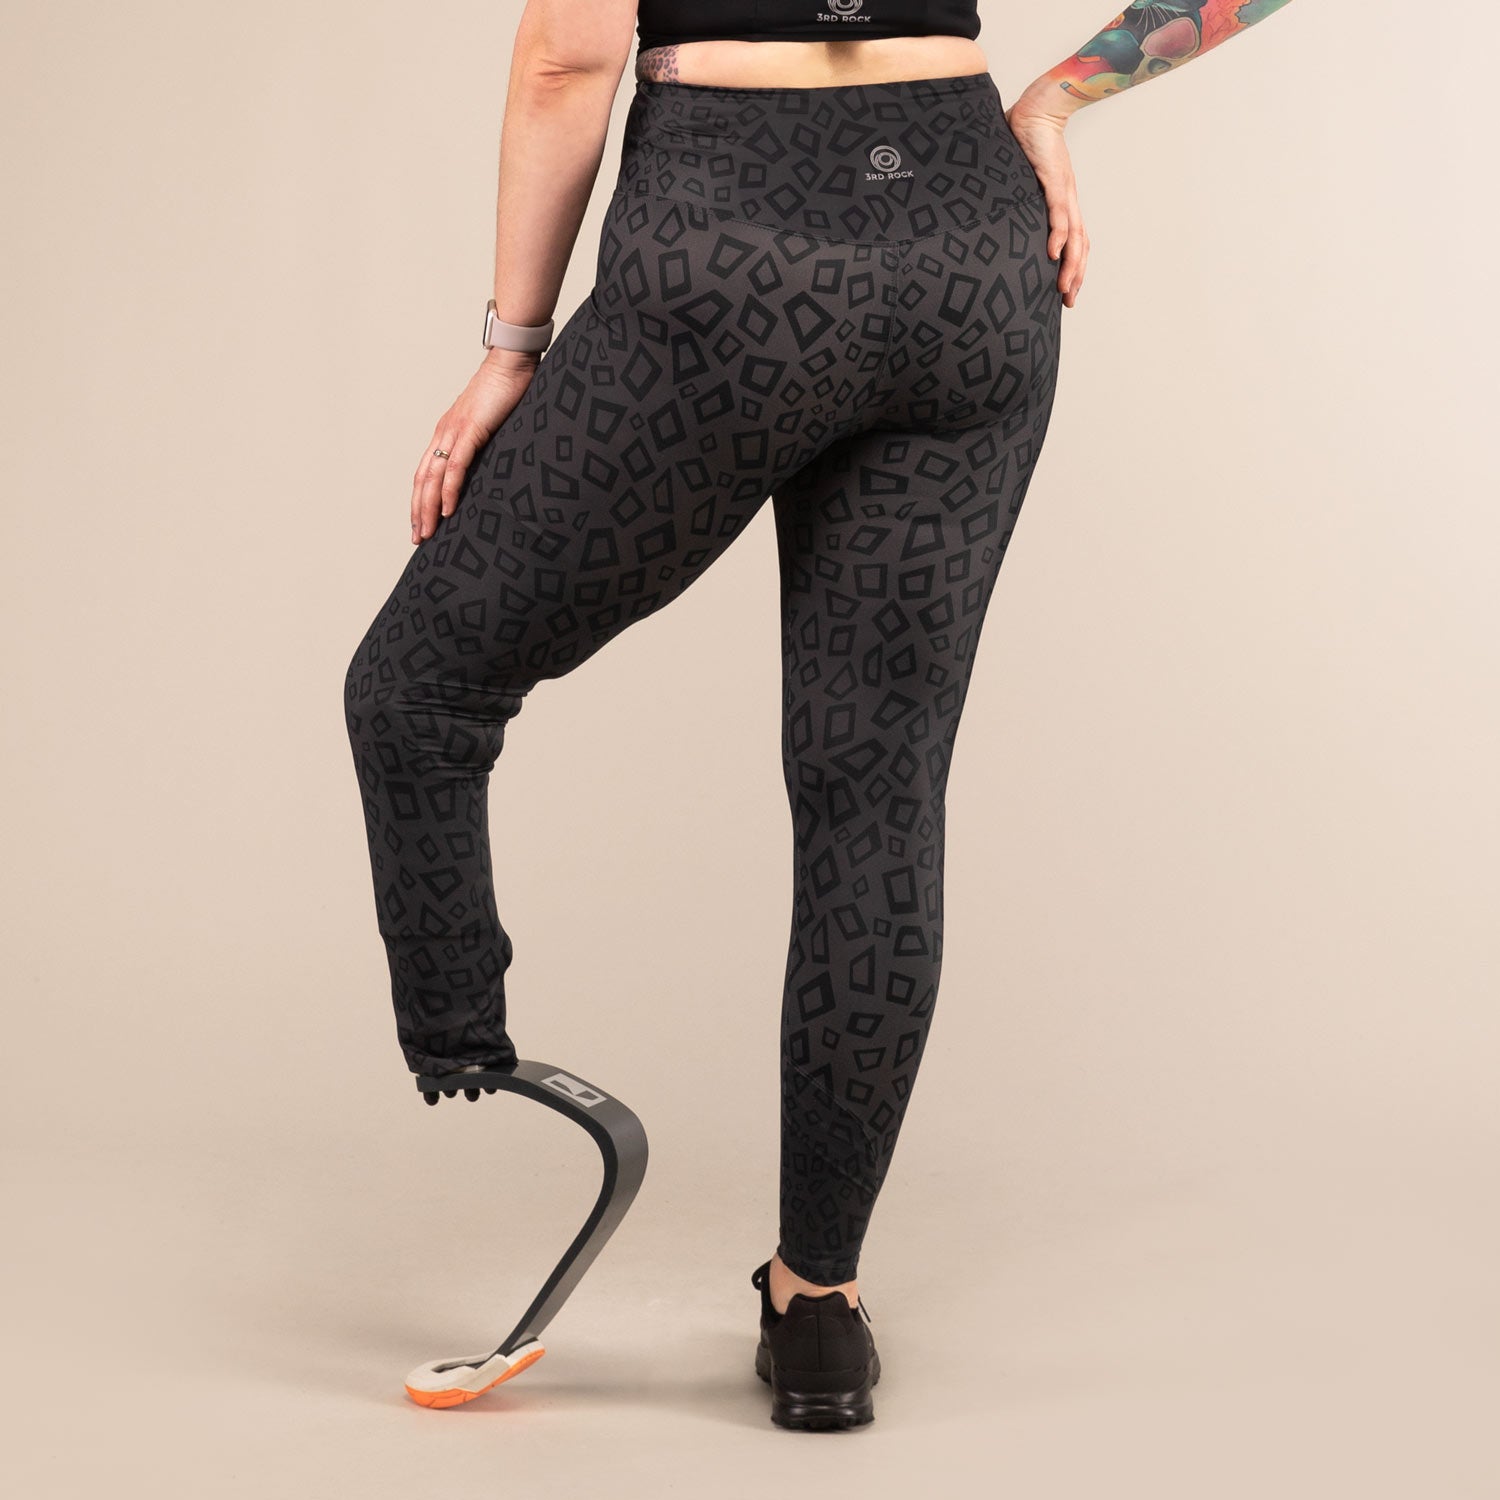 TITAN MINIMAL LEOPARD | Printed Recycled Leggings | 3RD ROCK Clothing -  Laura is 5ft 6 with a 31.5" waist, 43" hips and wears a size 14 F